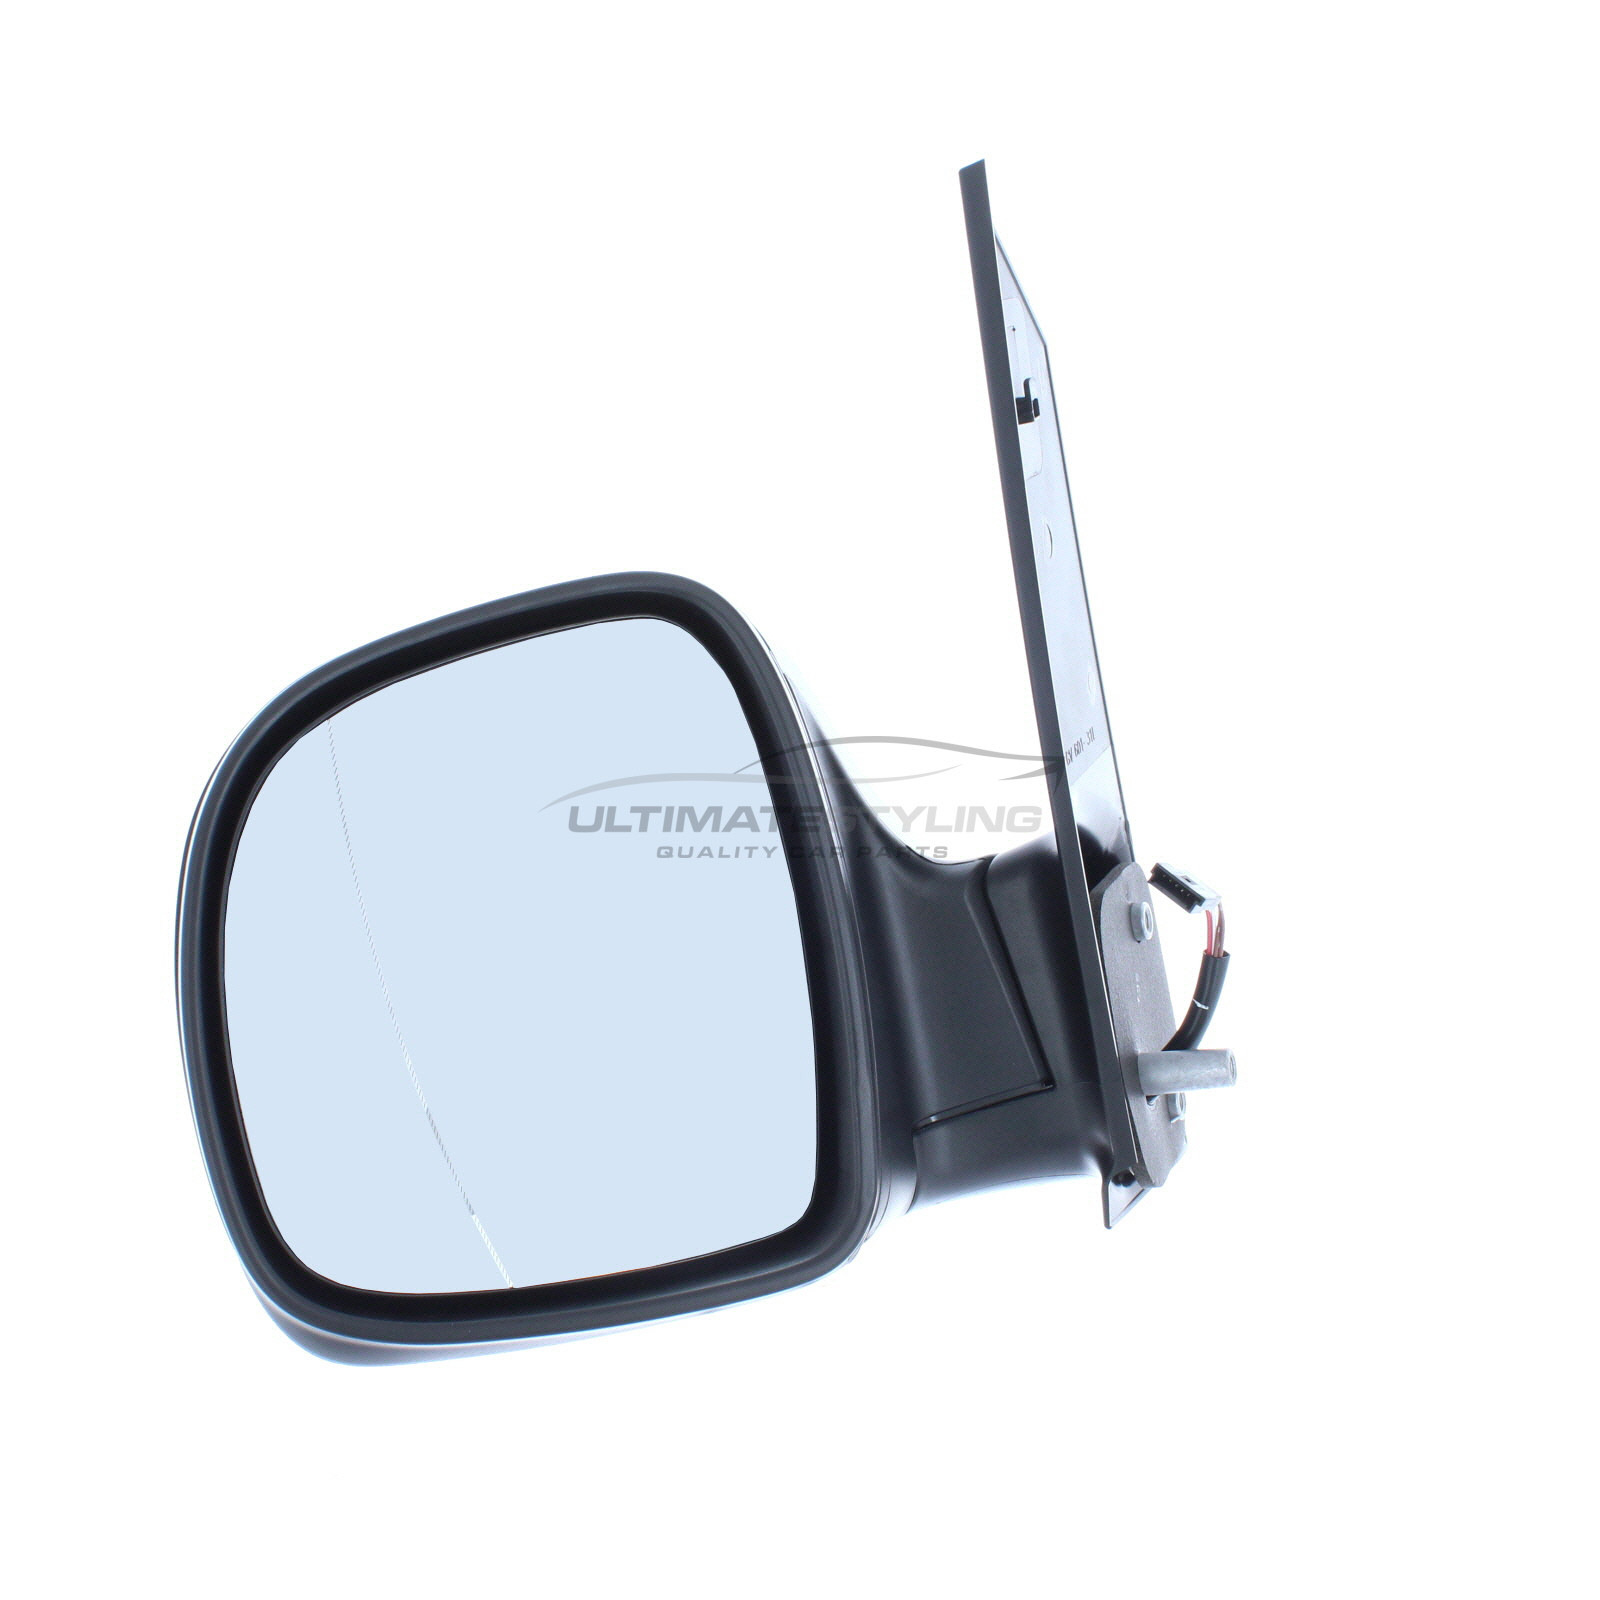 W639 For MERSD-Vito heated Year 2003 To 2011 Left Hand Side Door Mirror Glass With base Plate 